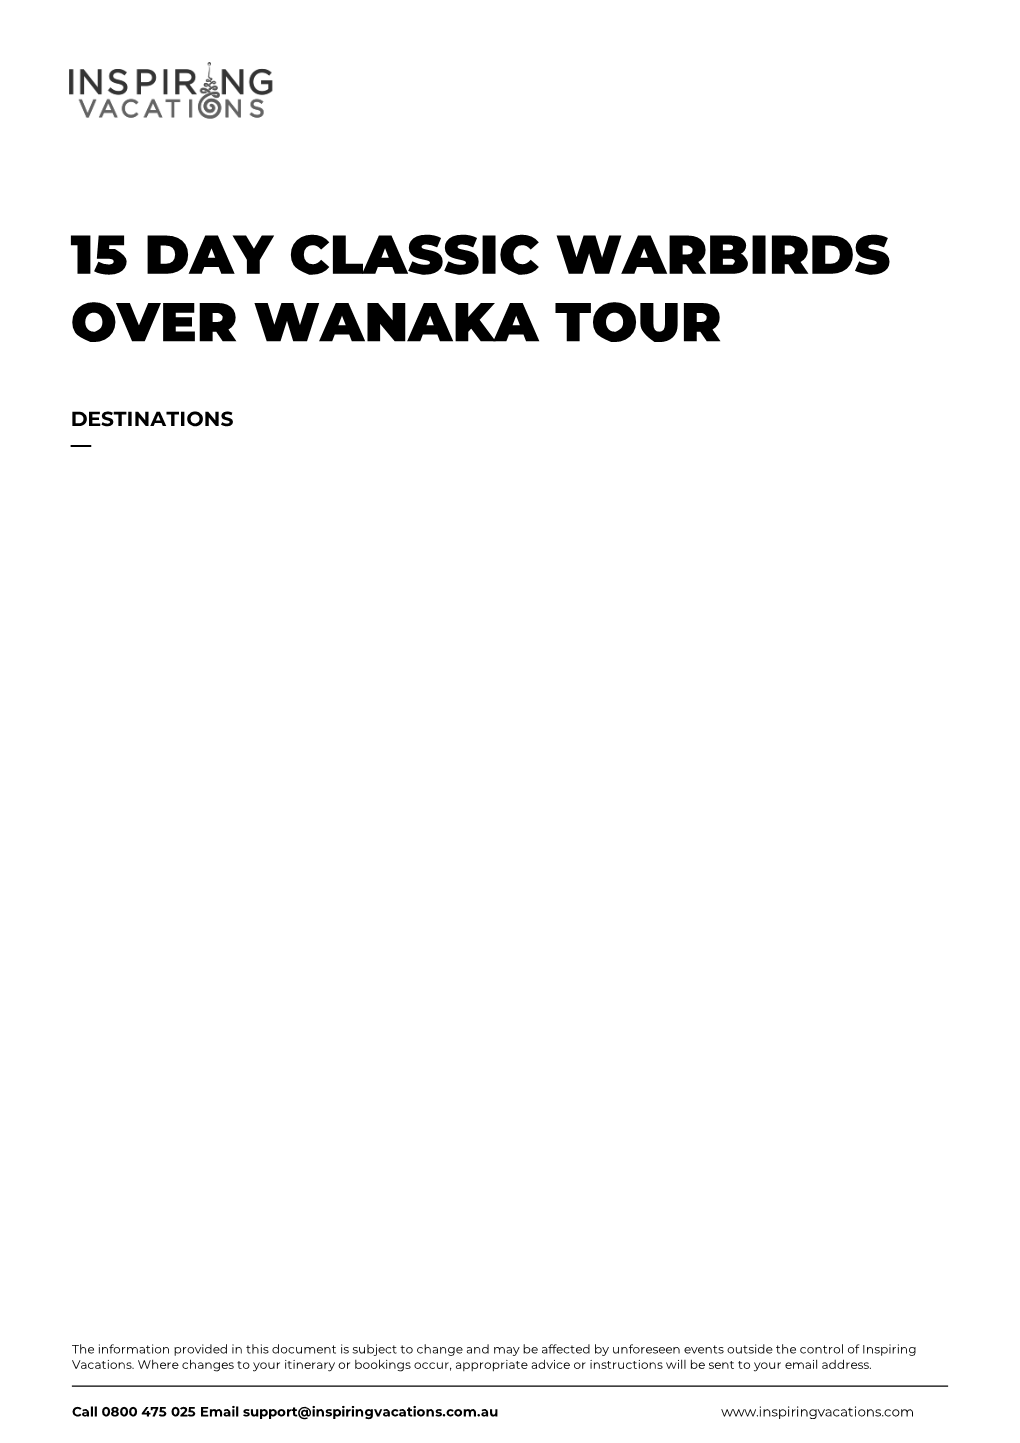 15 Day Classic Warbirds Over Wanaka Tour